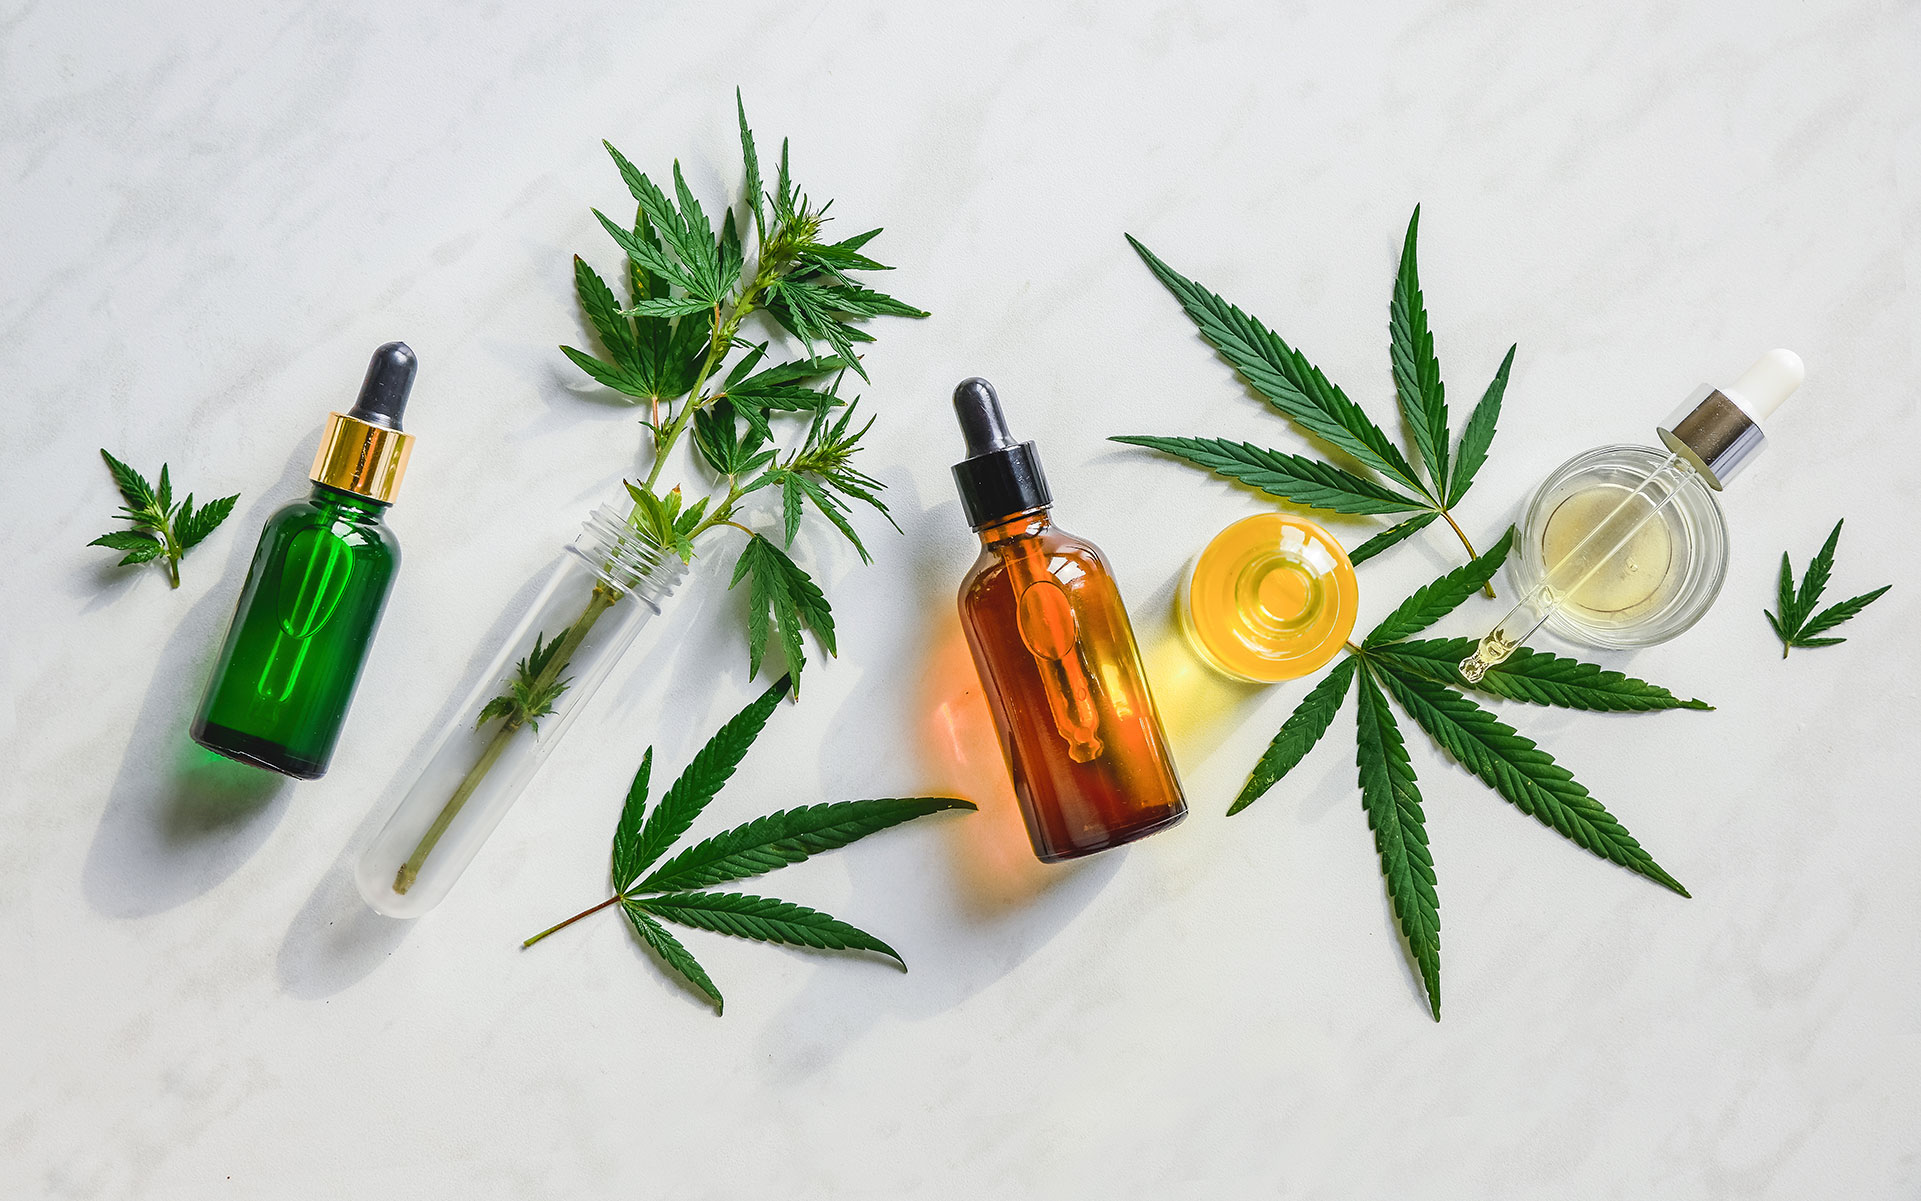 How Long Do I Need To Take Cbd Vape Oil - Cbd|Oil|Cannabidiol|Products|View|Abstract|Effects|Hemp|Cannabis|Product|Thc|Pain|People|Health|Body|Plant|Cannabinoids|Medications|Oils|Drug|Benefits|System|Study|Marijuana|Anxiety|Side|Research|Effect|Liver|Quality|Treatment|Studies|Epilepsy|Symptoms|Gummies|Compounds|Dose|Time|Inflammation|Bottle|Cbd Oil|View Abstract|Side Effects|Cbd Products|Endocannabinoid System|Multiple Sclerosis|Cbd Oils|Cbd Gummies|Cannabis Plant|Hemp Oil|Cbd Product|Hemp Plant|United States|Cytochrome P450|Many People|Chronic Pain|Nuleaf Naturals|Royal Cbd|Full-Spectrum Cbd Oil|Drug Administration|Cbd Oil Products|Medical Marijuana|Drug Test|Heavy Metals|Clinical Trial|Clinical Trials|Cbd Oil Side|Rating Highlights|Wide Variety|Animal Studies